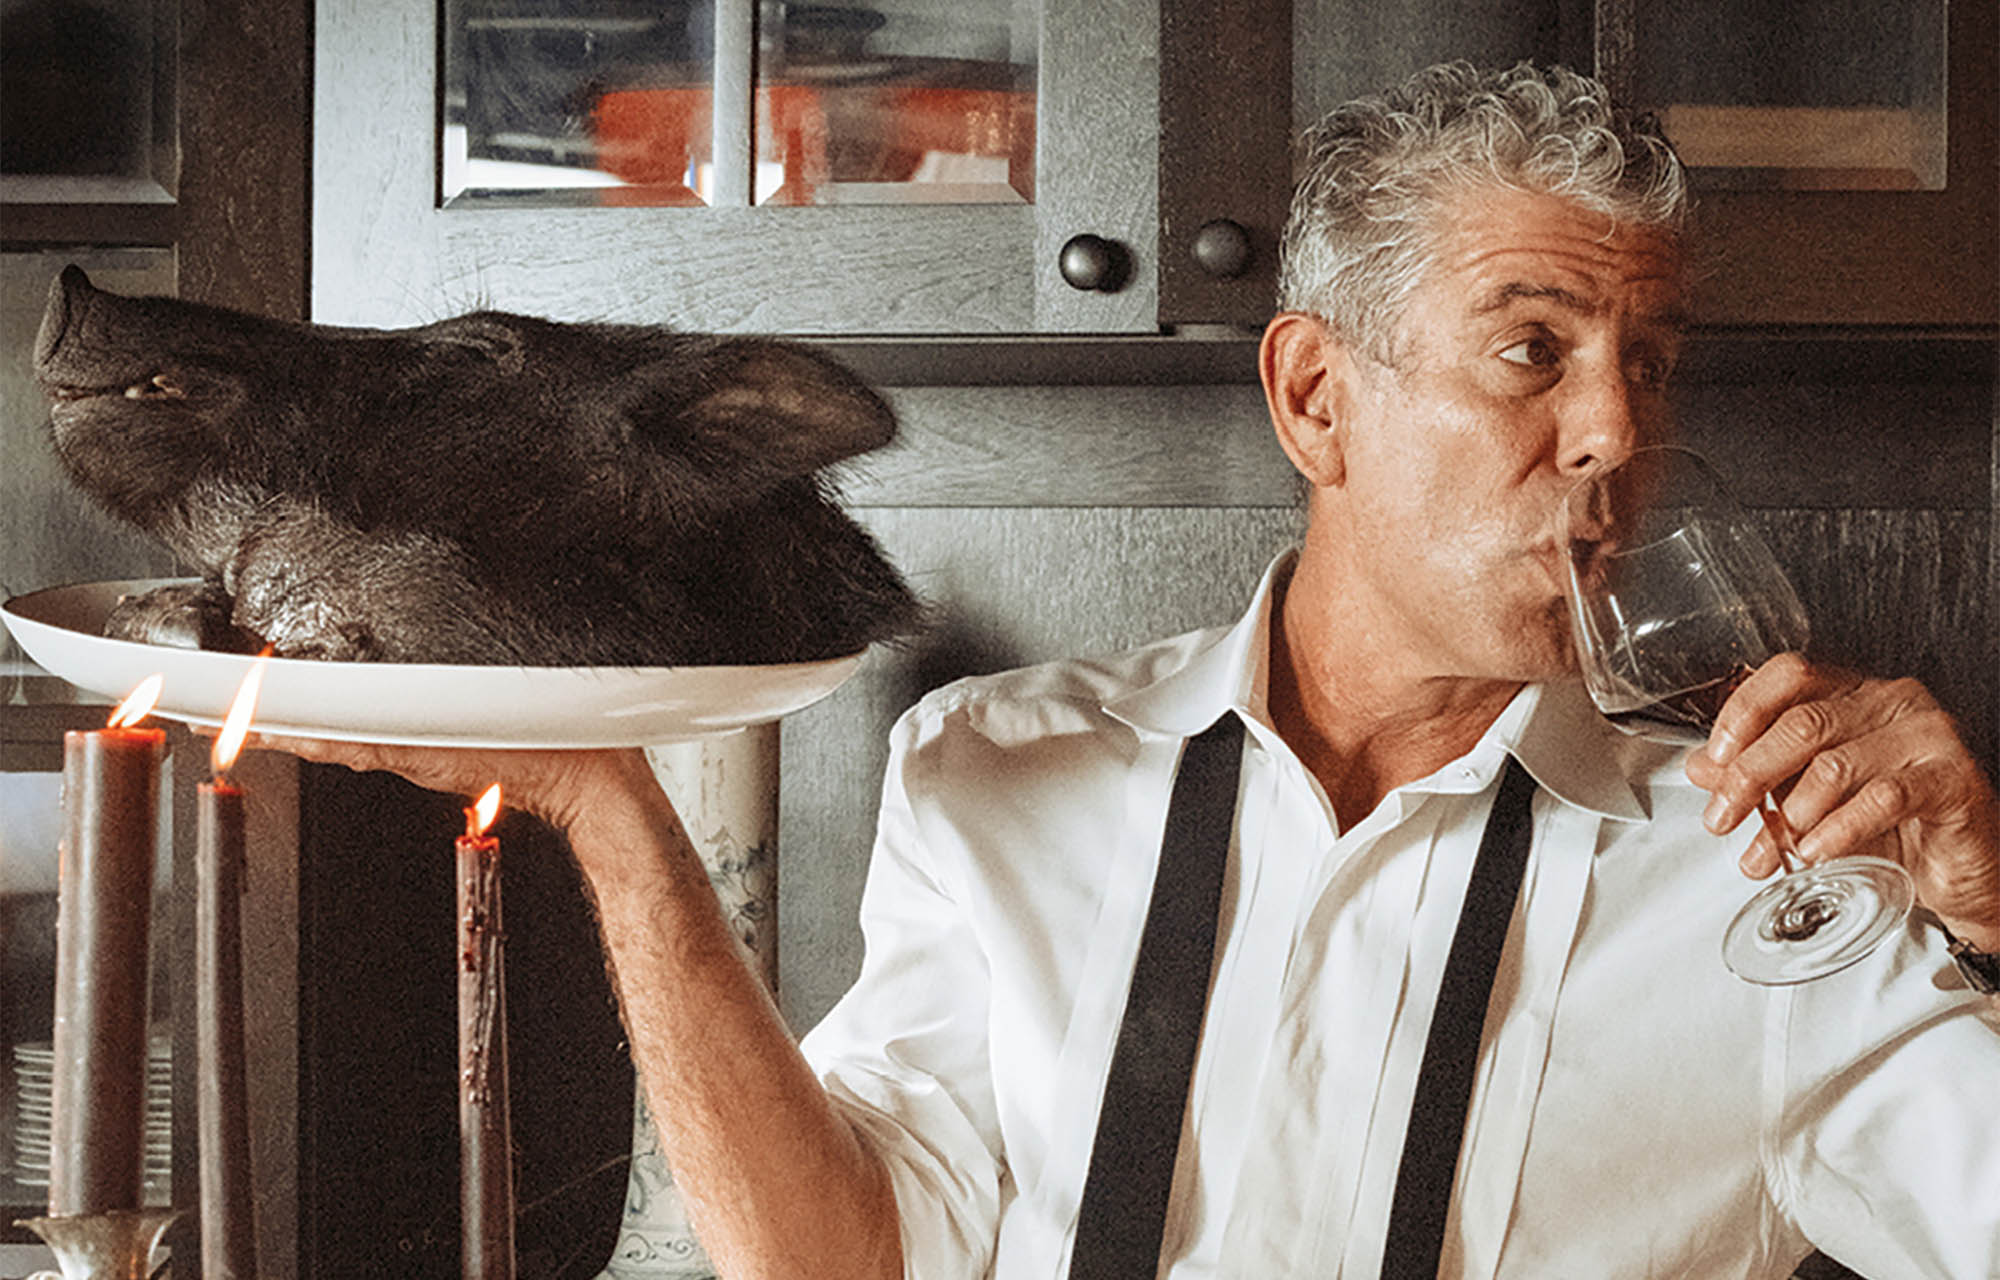 Beloved chef and travel host Anthony Bourdain died last year aged 61. With love, here’s a rundown of his influential TV shows.